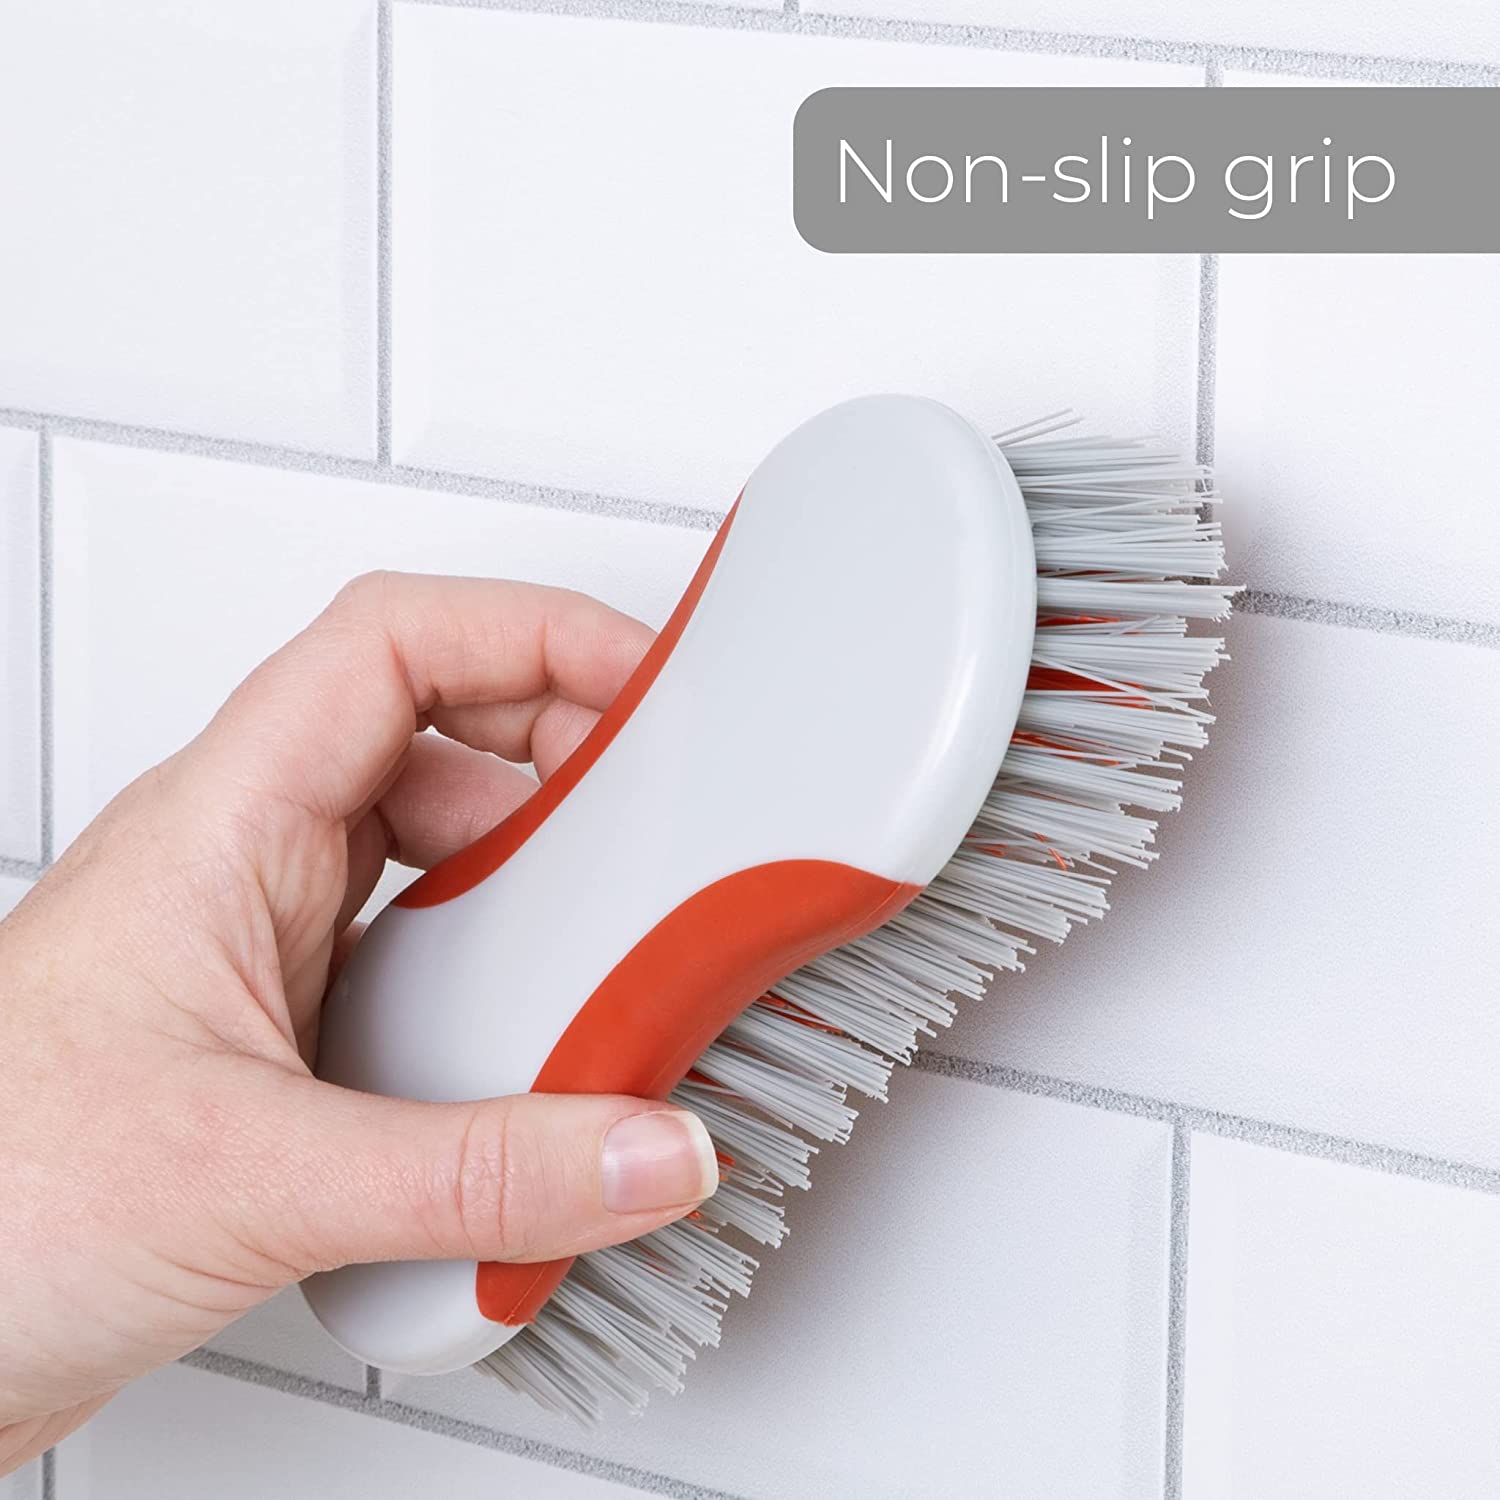 https://cdn.shopify.com/s/files/1/2393/7799/products/heavy-duty-scrub-brush-smart-design-cleaning-7001191-incrementing-number-554229.jpg?v=1679342034